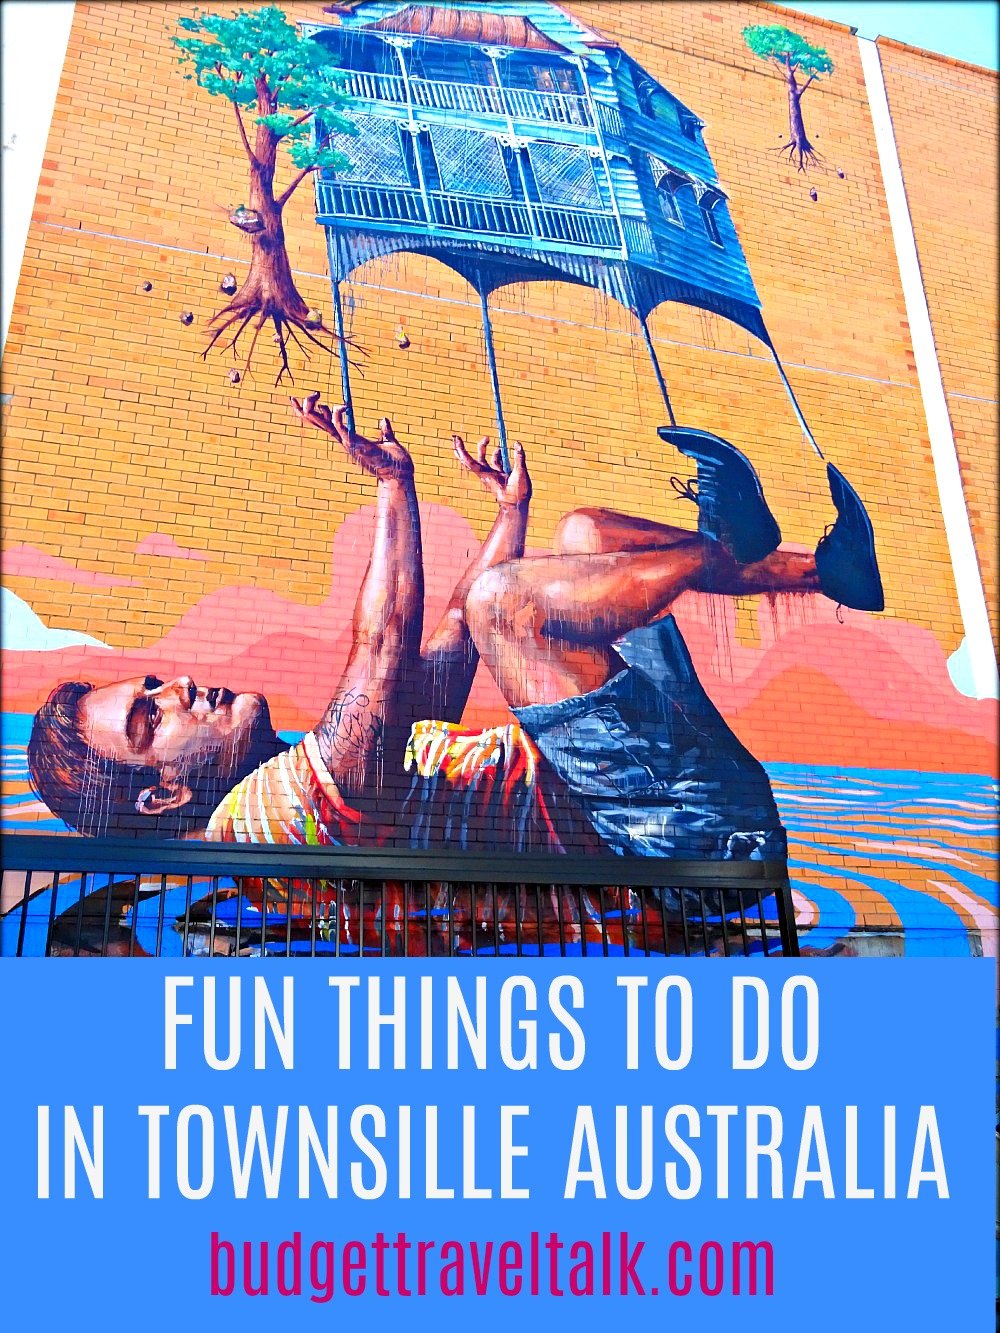 City Lane Townsville is one of the fun things to do in Townsville Australia